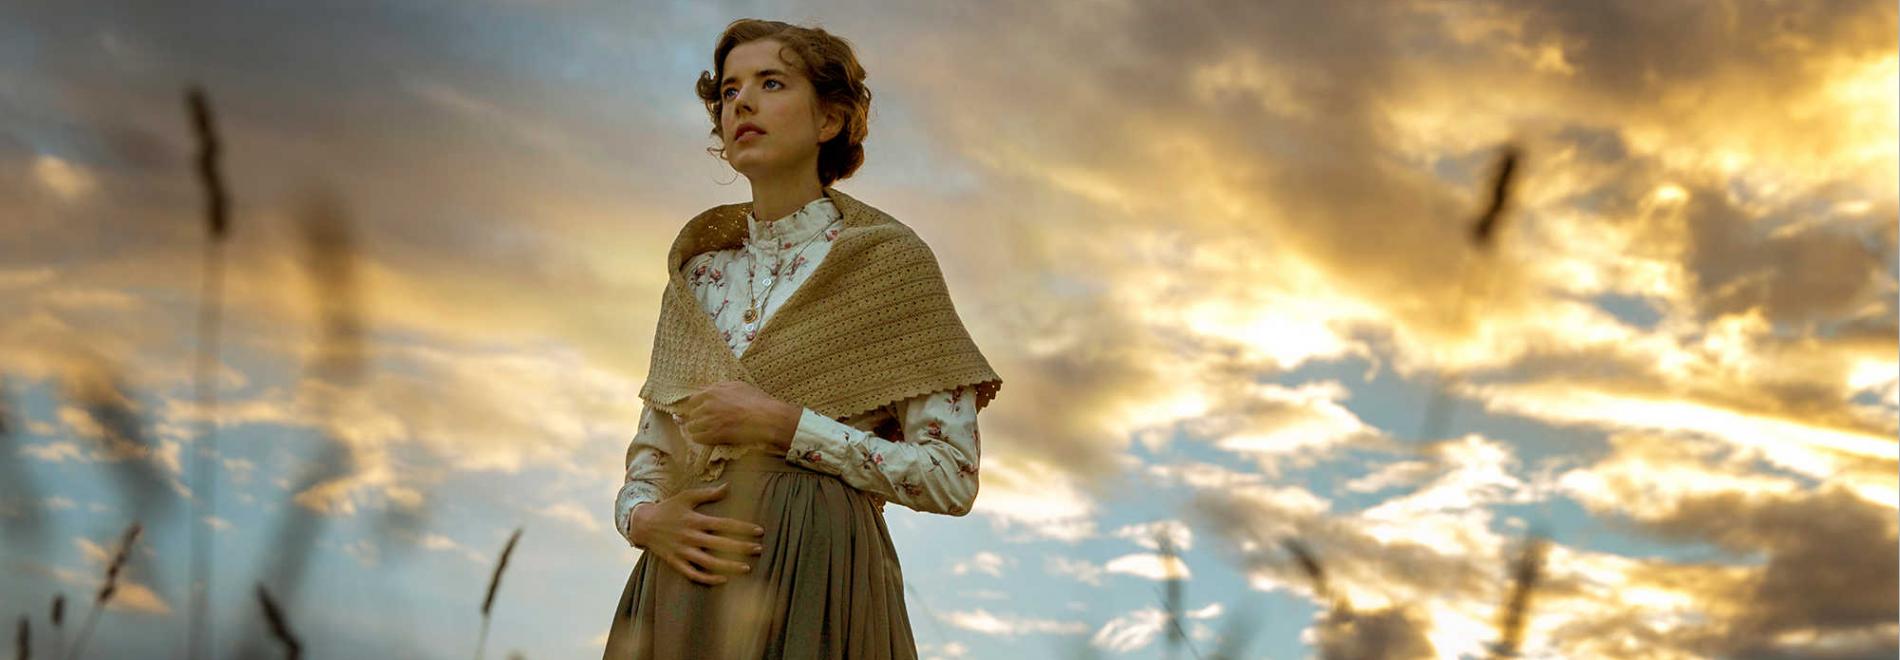 Sunset Song (Terence Davies, 2015)